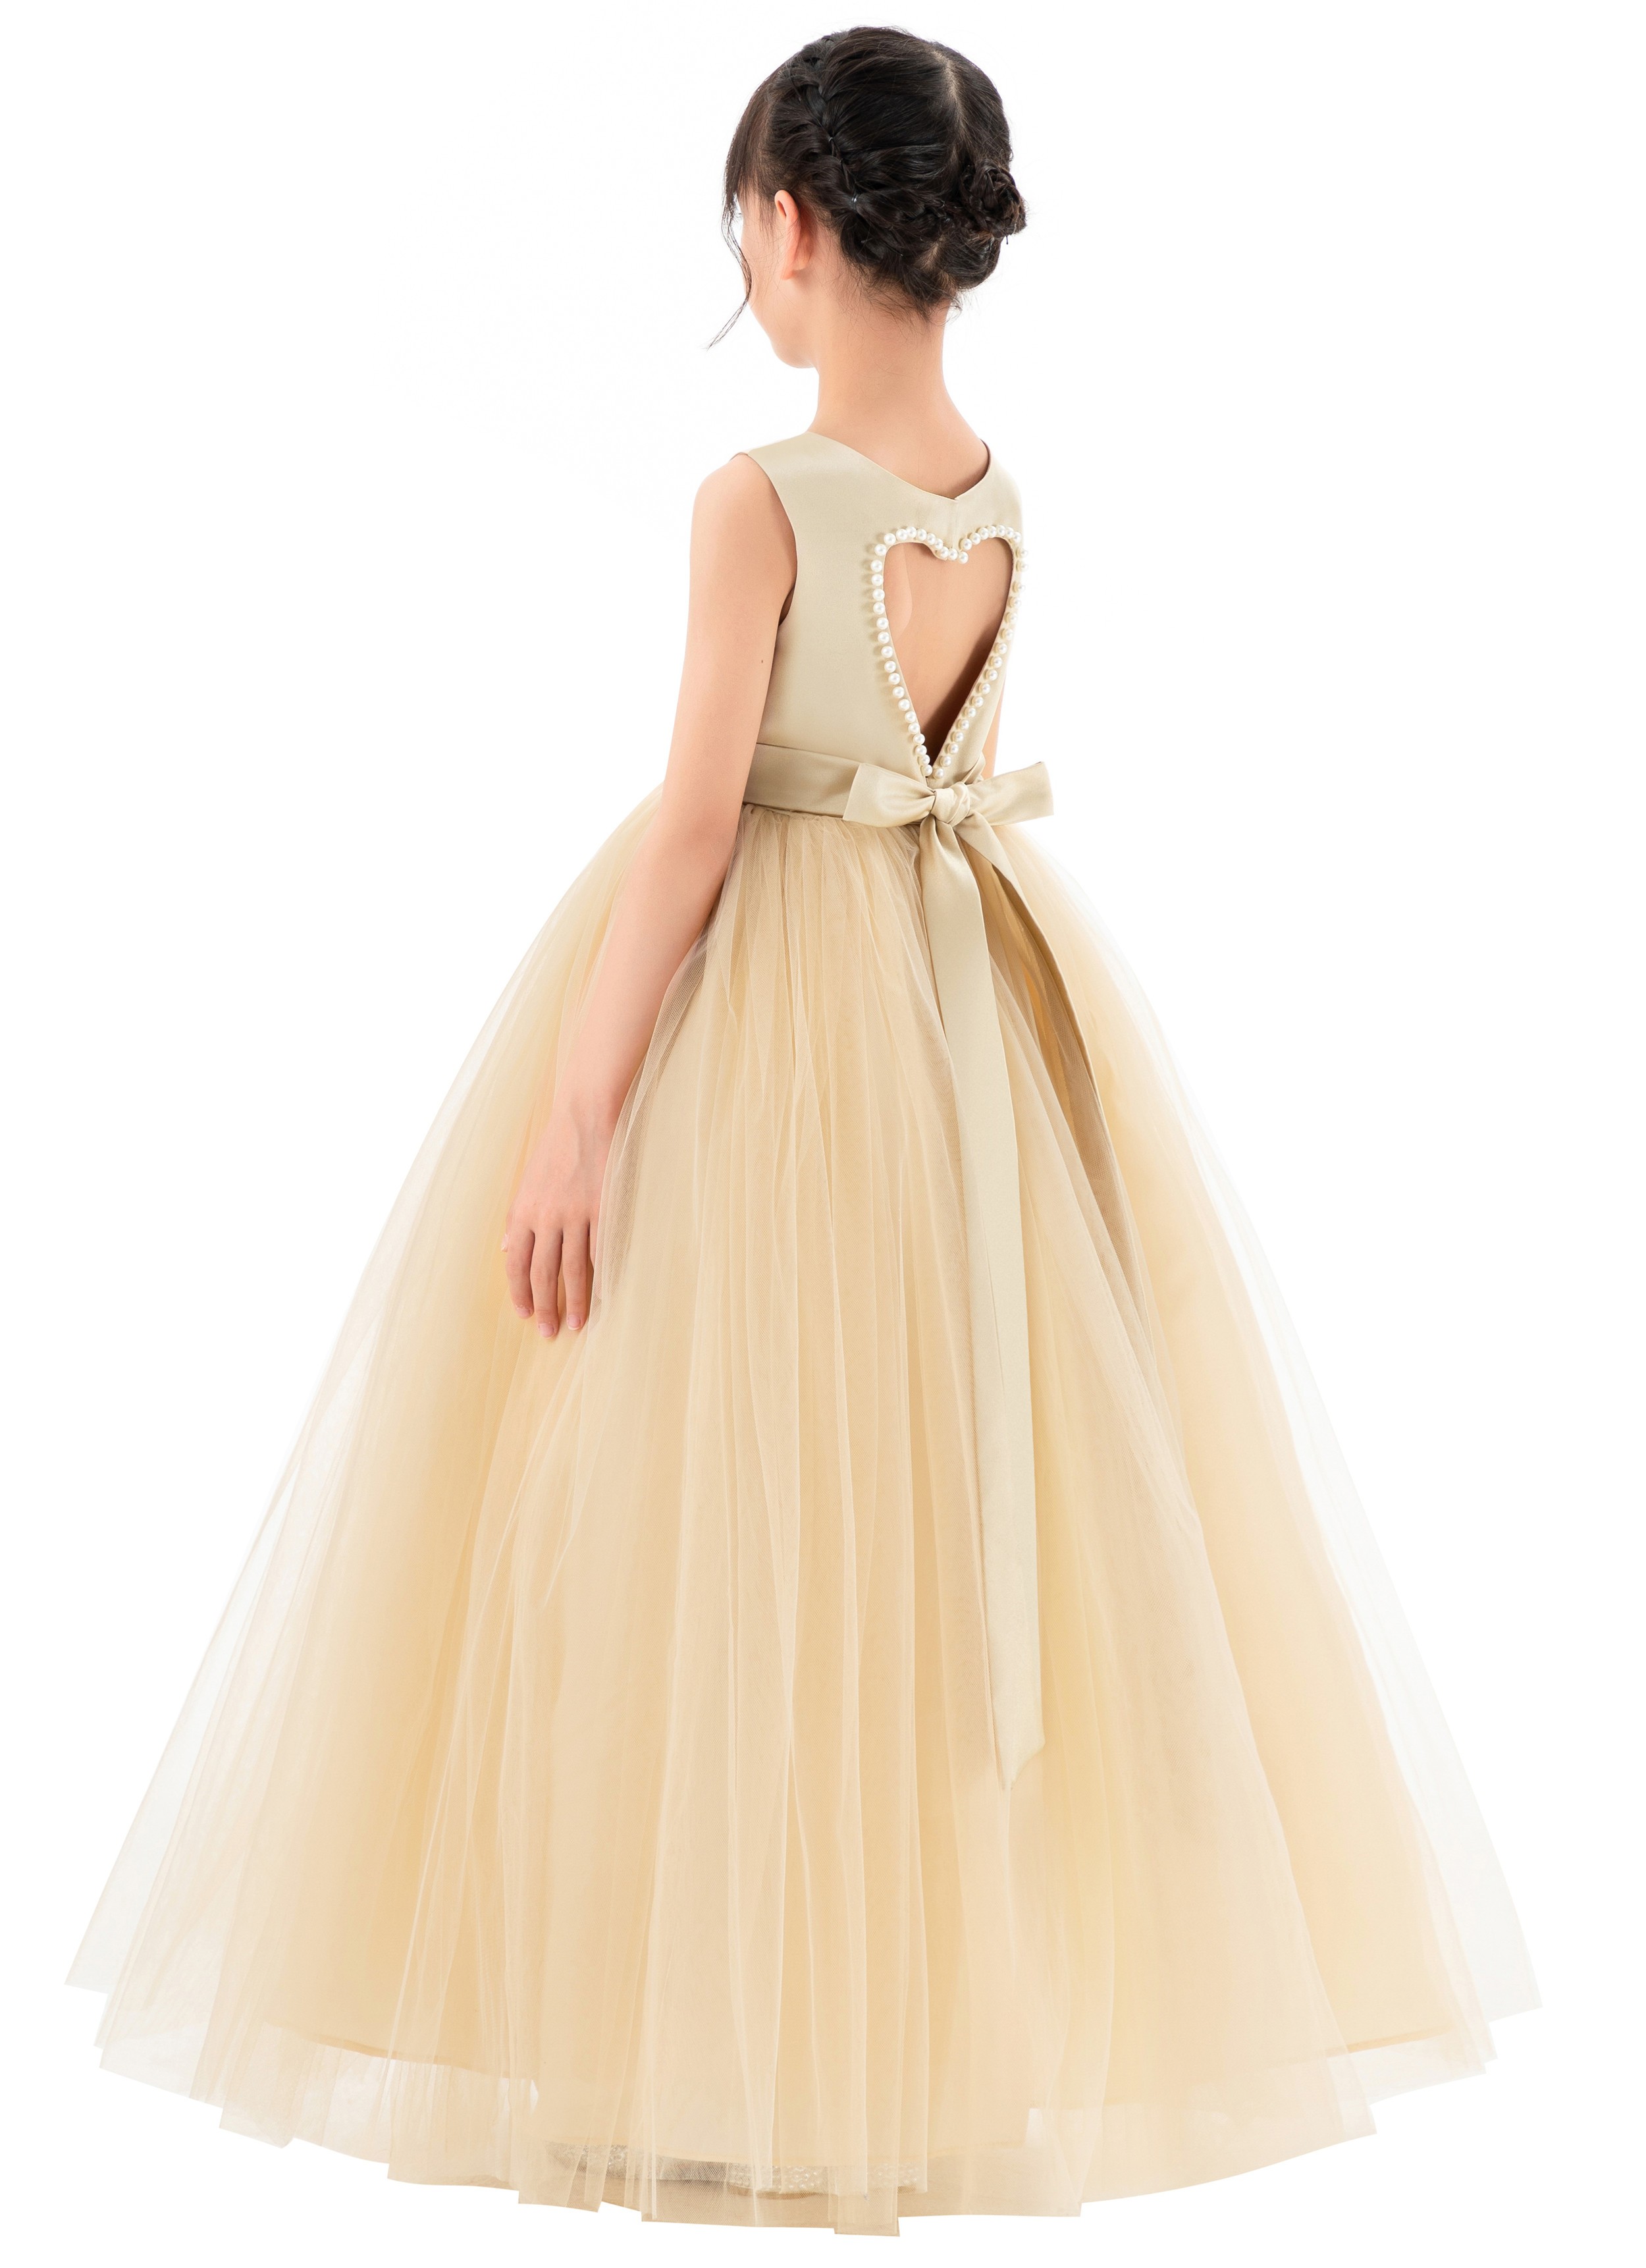 Champagne Satin Heart Cutout Flower Girl Dress with Pearl Beaded Trim P250